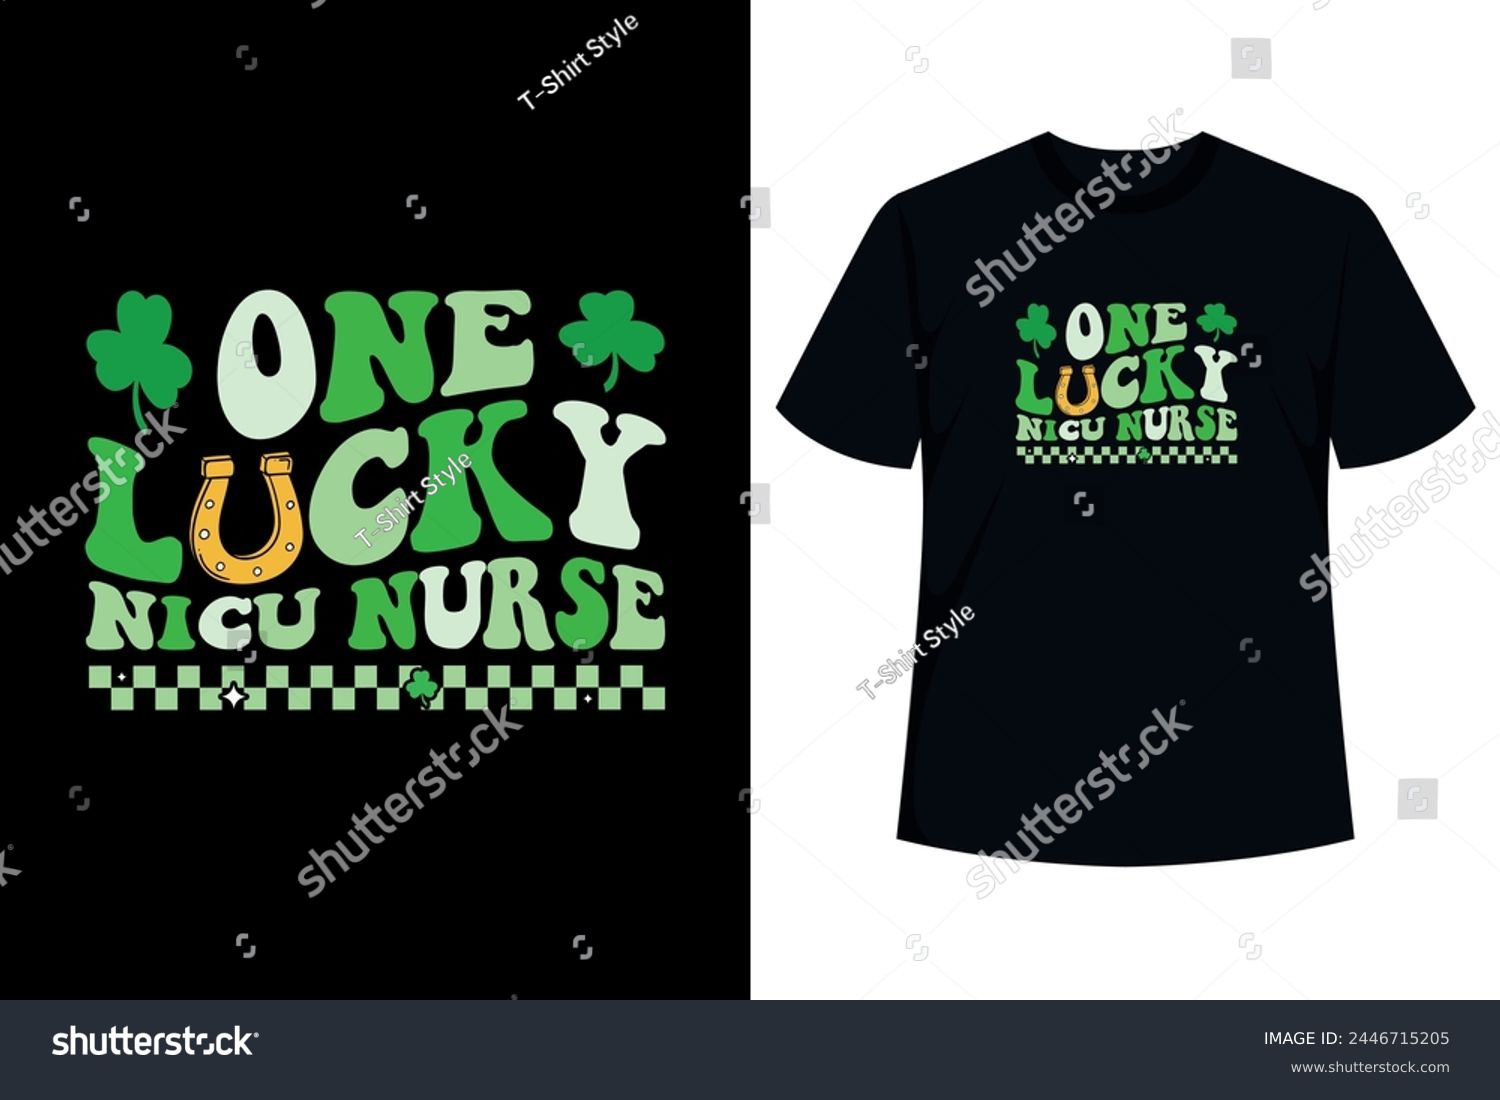 SVG of One Lucky Nicu Nurse Groovy Retro Nurse St Patrick's Day T-Shirt as a St Patricks Day gift for Nurses! Wear this lucky vintage graphic Ireland tee clothes outfit for RN, ICU, OB, ER, NICU, PACU, CNA svg